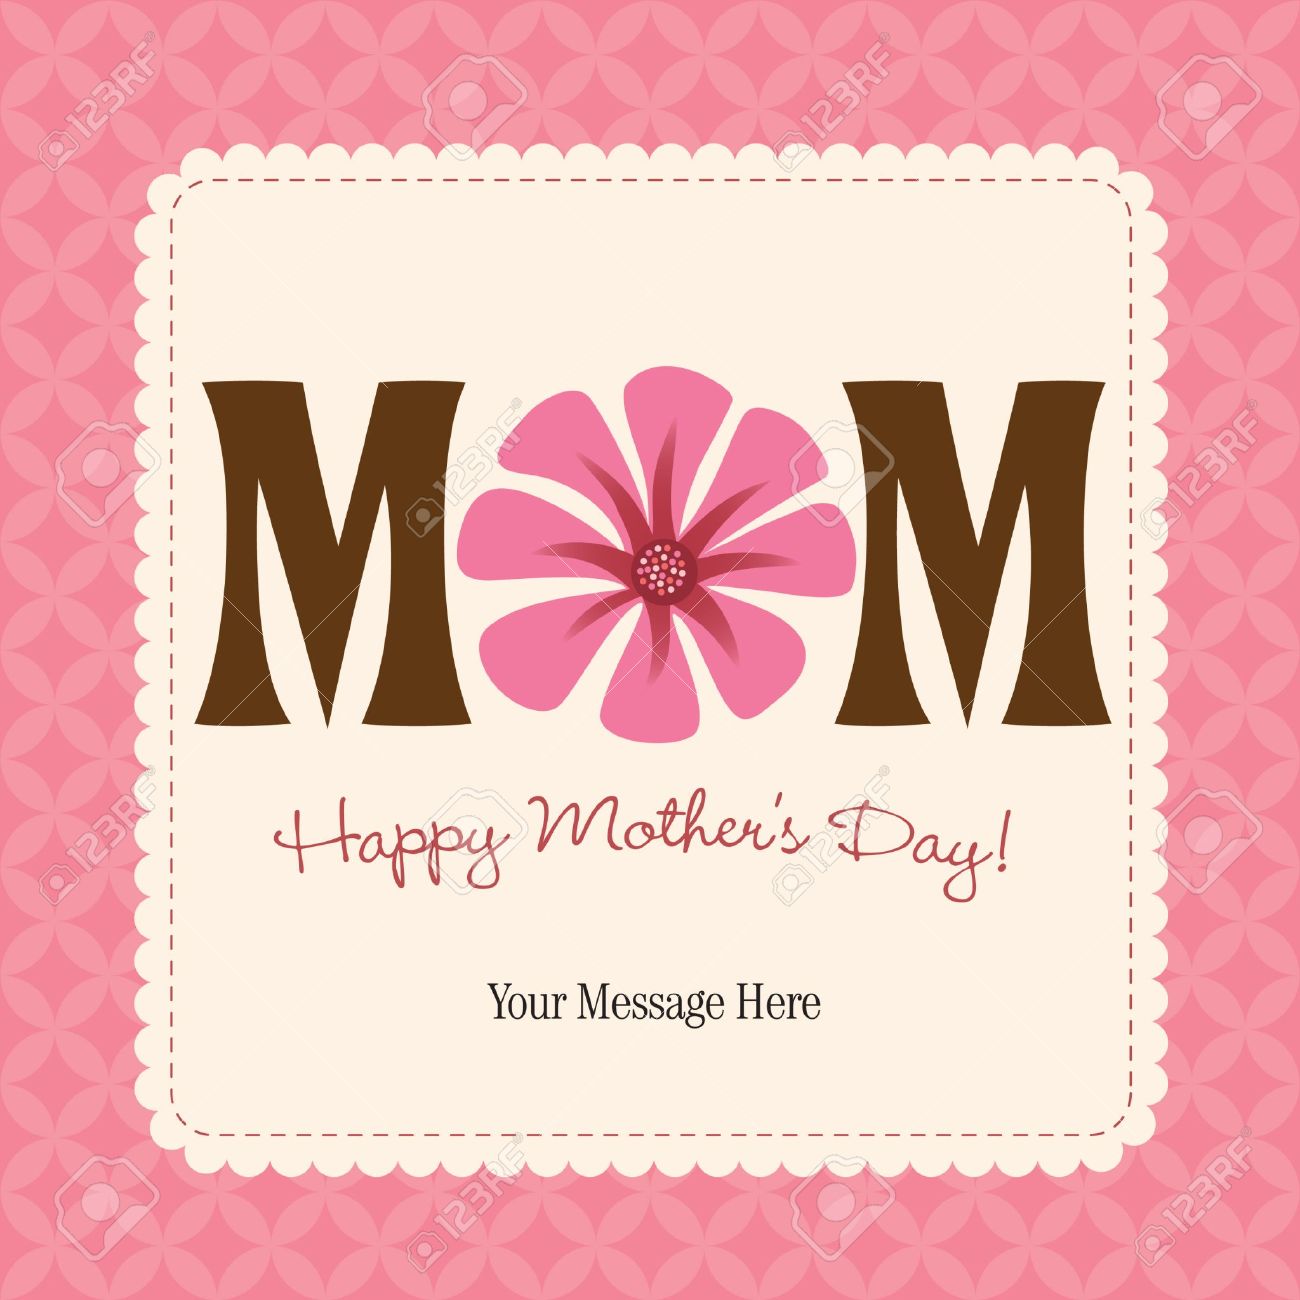 Mothers Day Background (3) - Mother's Day 8 May 2016